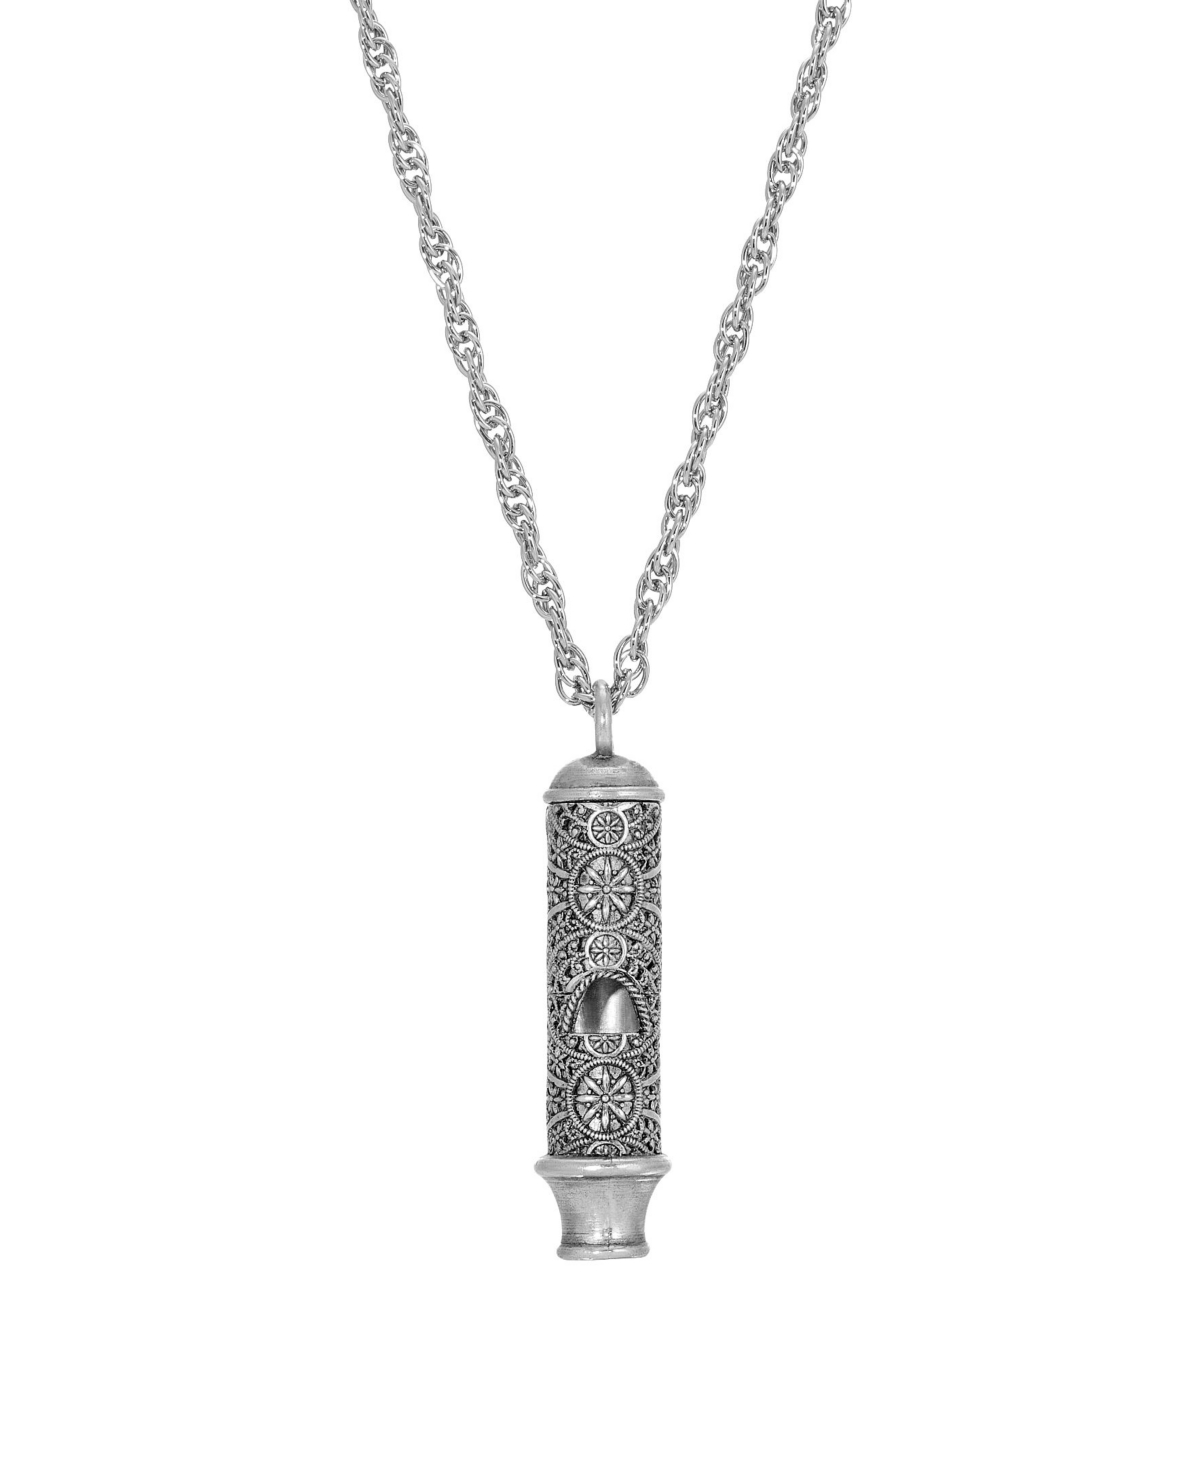 2028 Whistle Pendant Necklace In Silver-tone